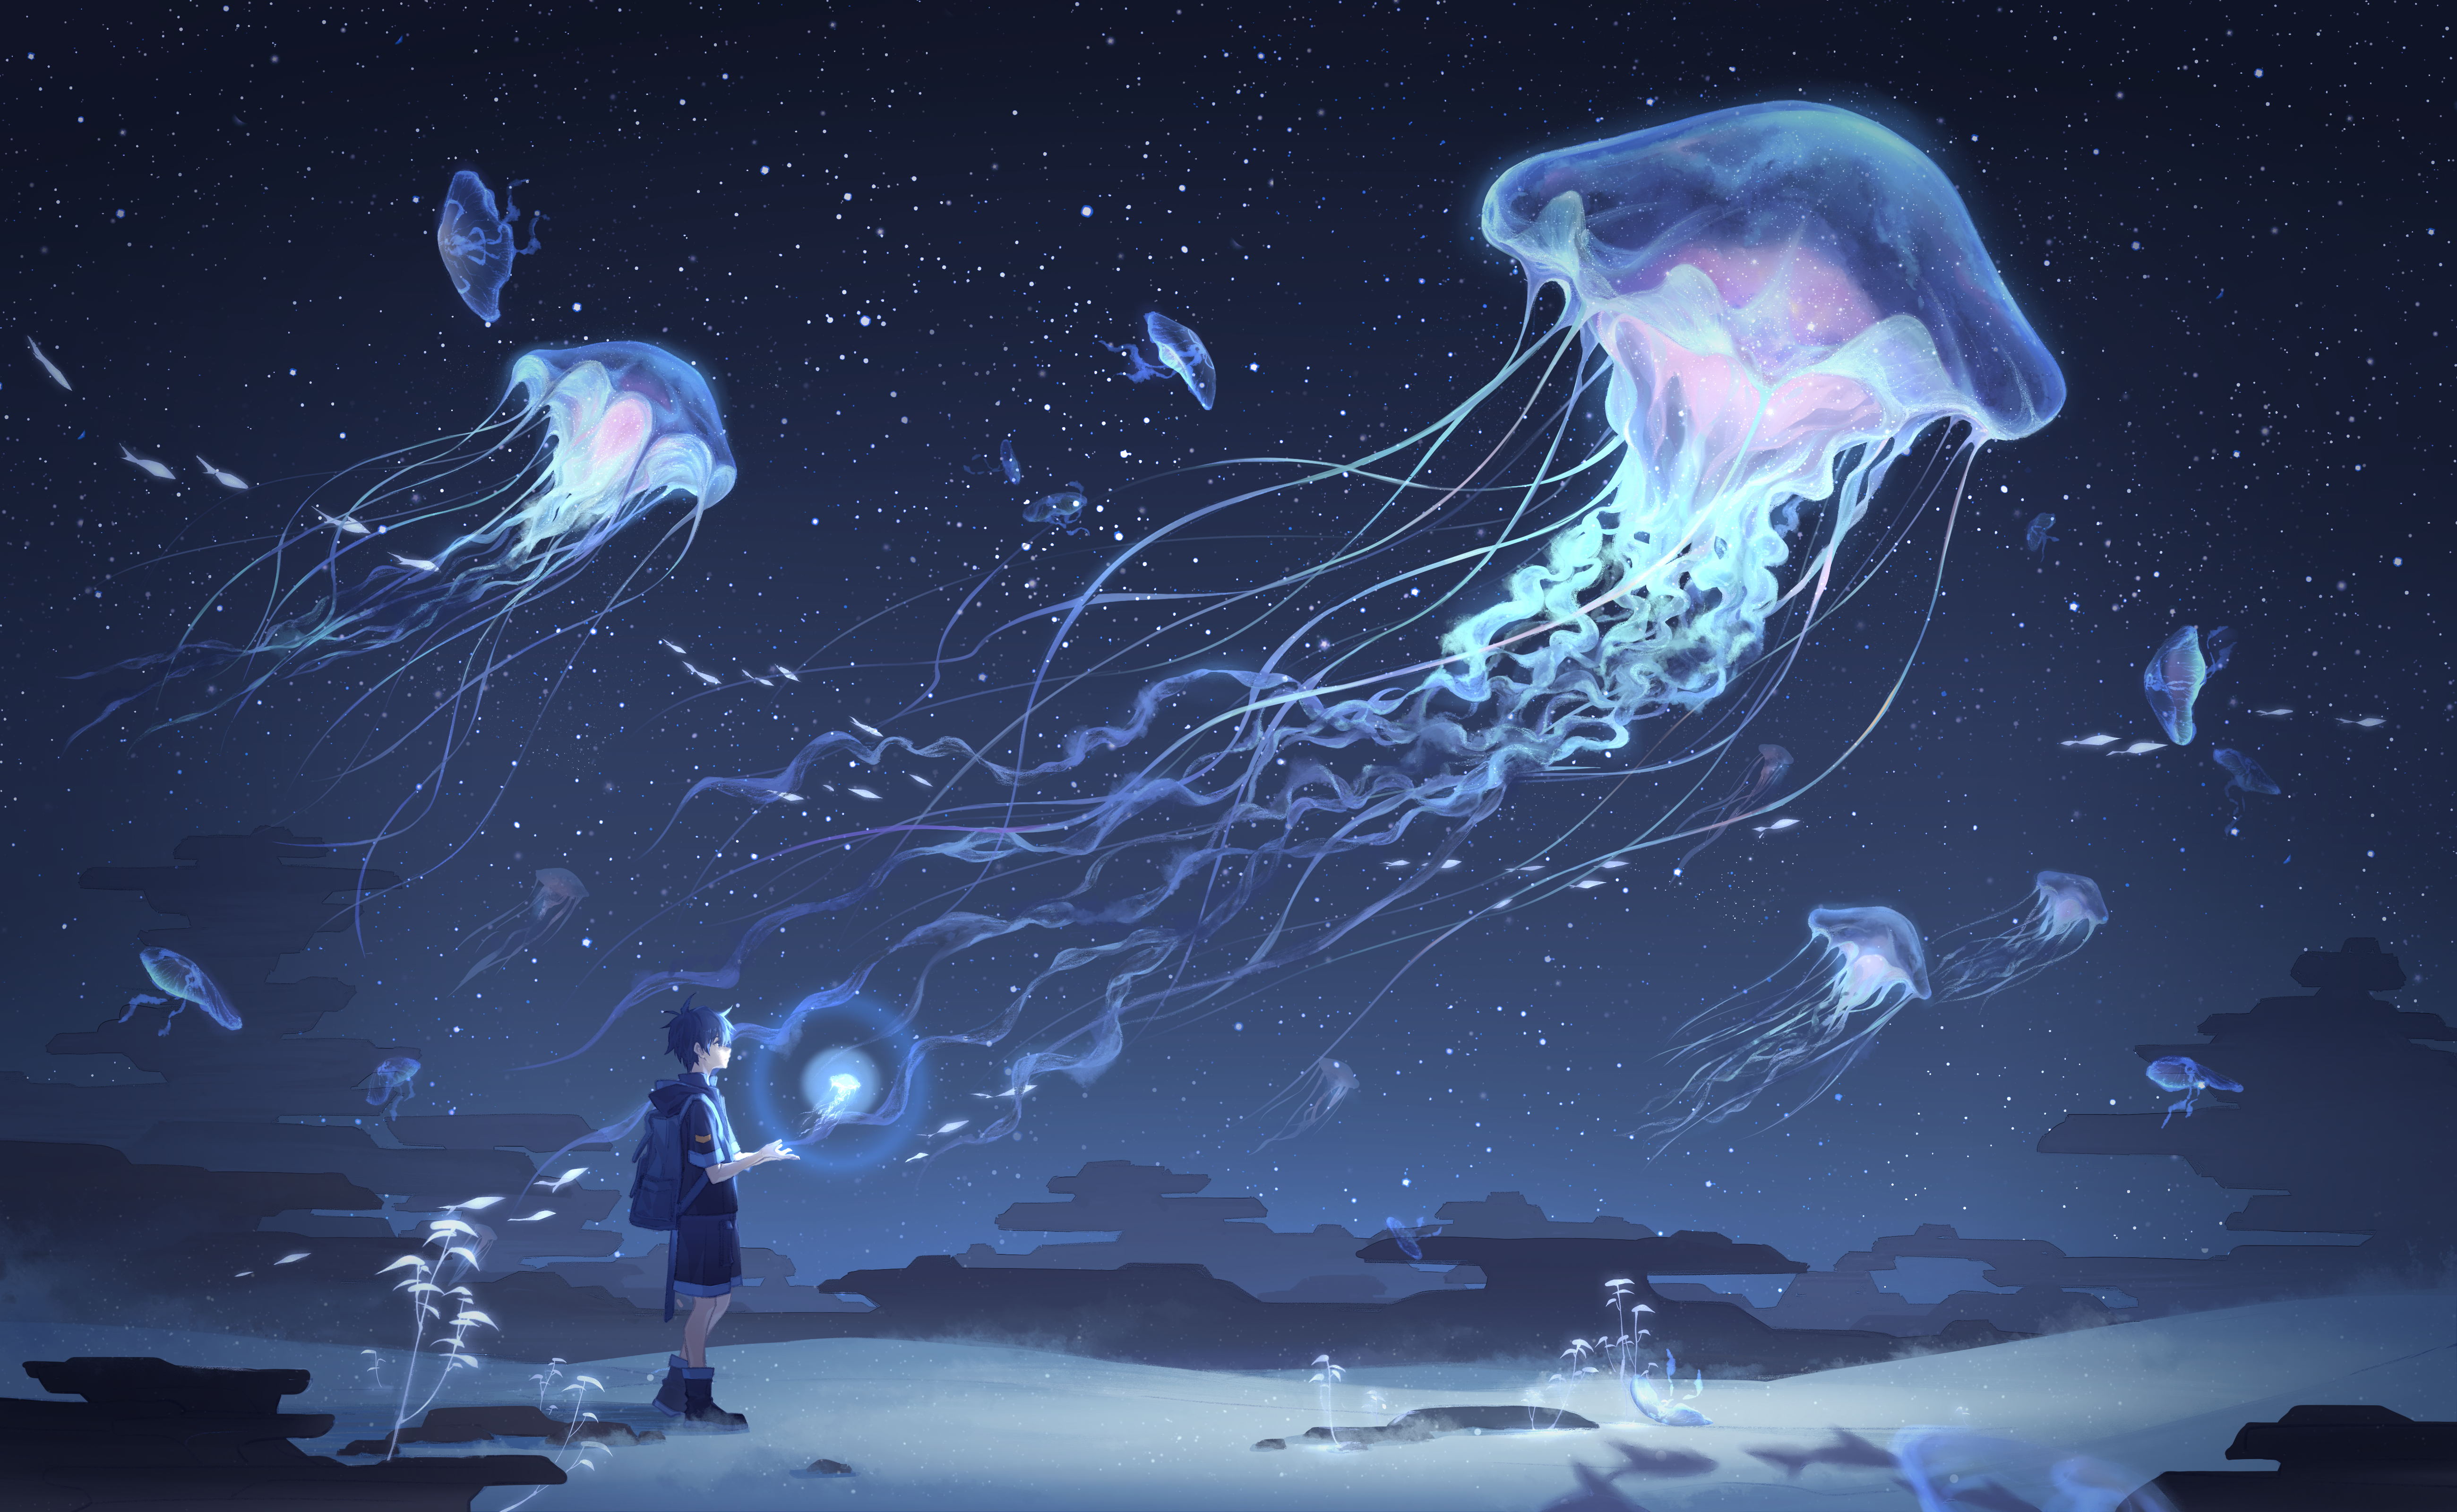 Boy in a land of jellyfish by Arsh